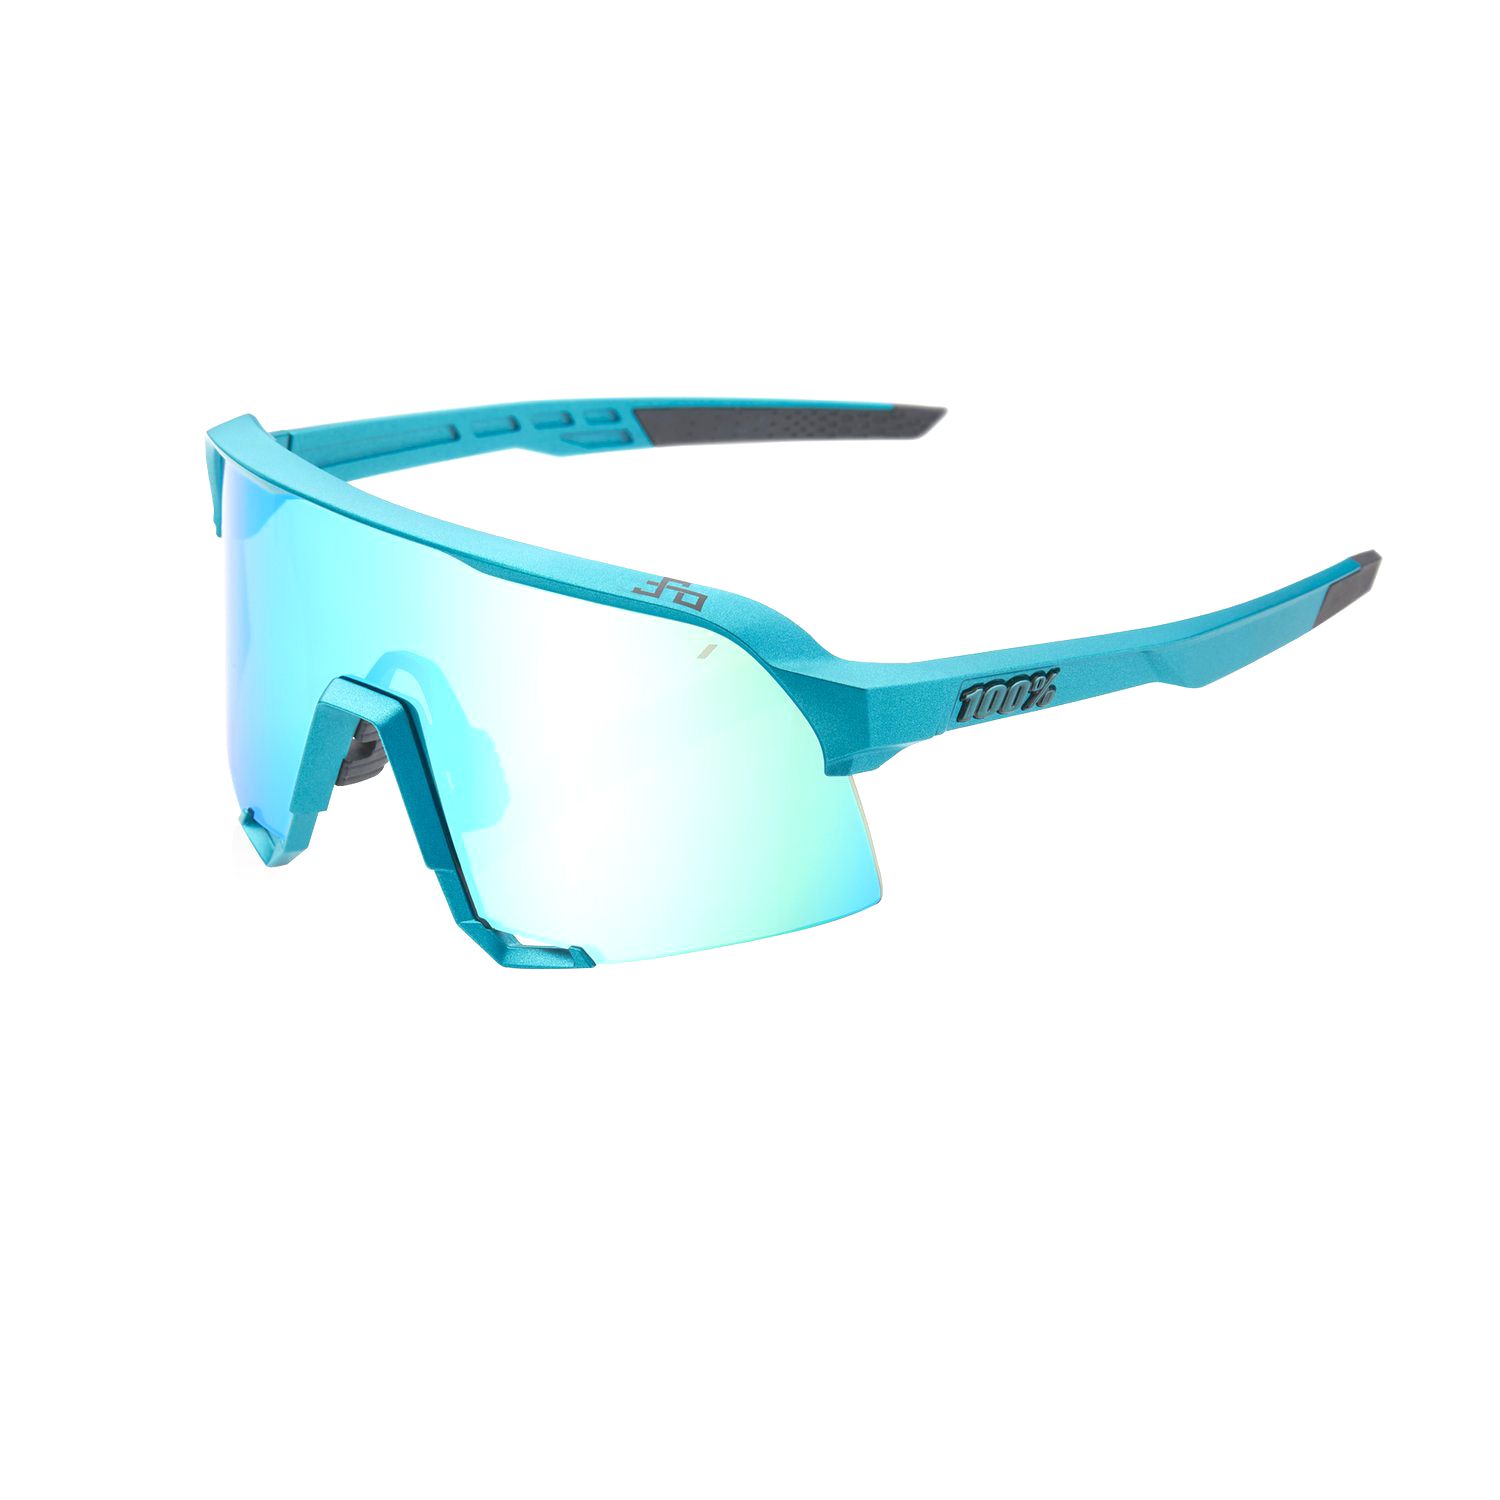 Eyewear, Sunglasses, Glasses, Aqua, Personal protective equipment, Turquoise, Goggles, Turquoise, Vision care, Teal, 